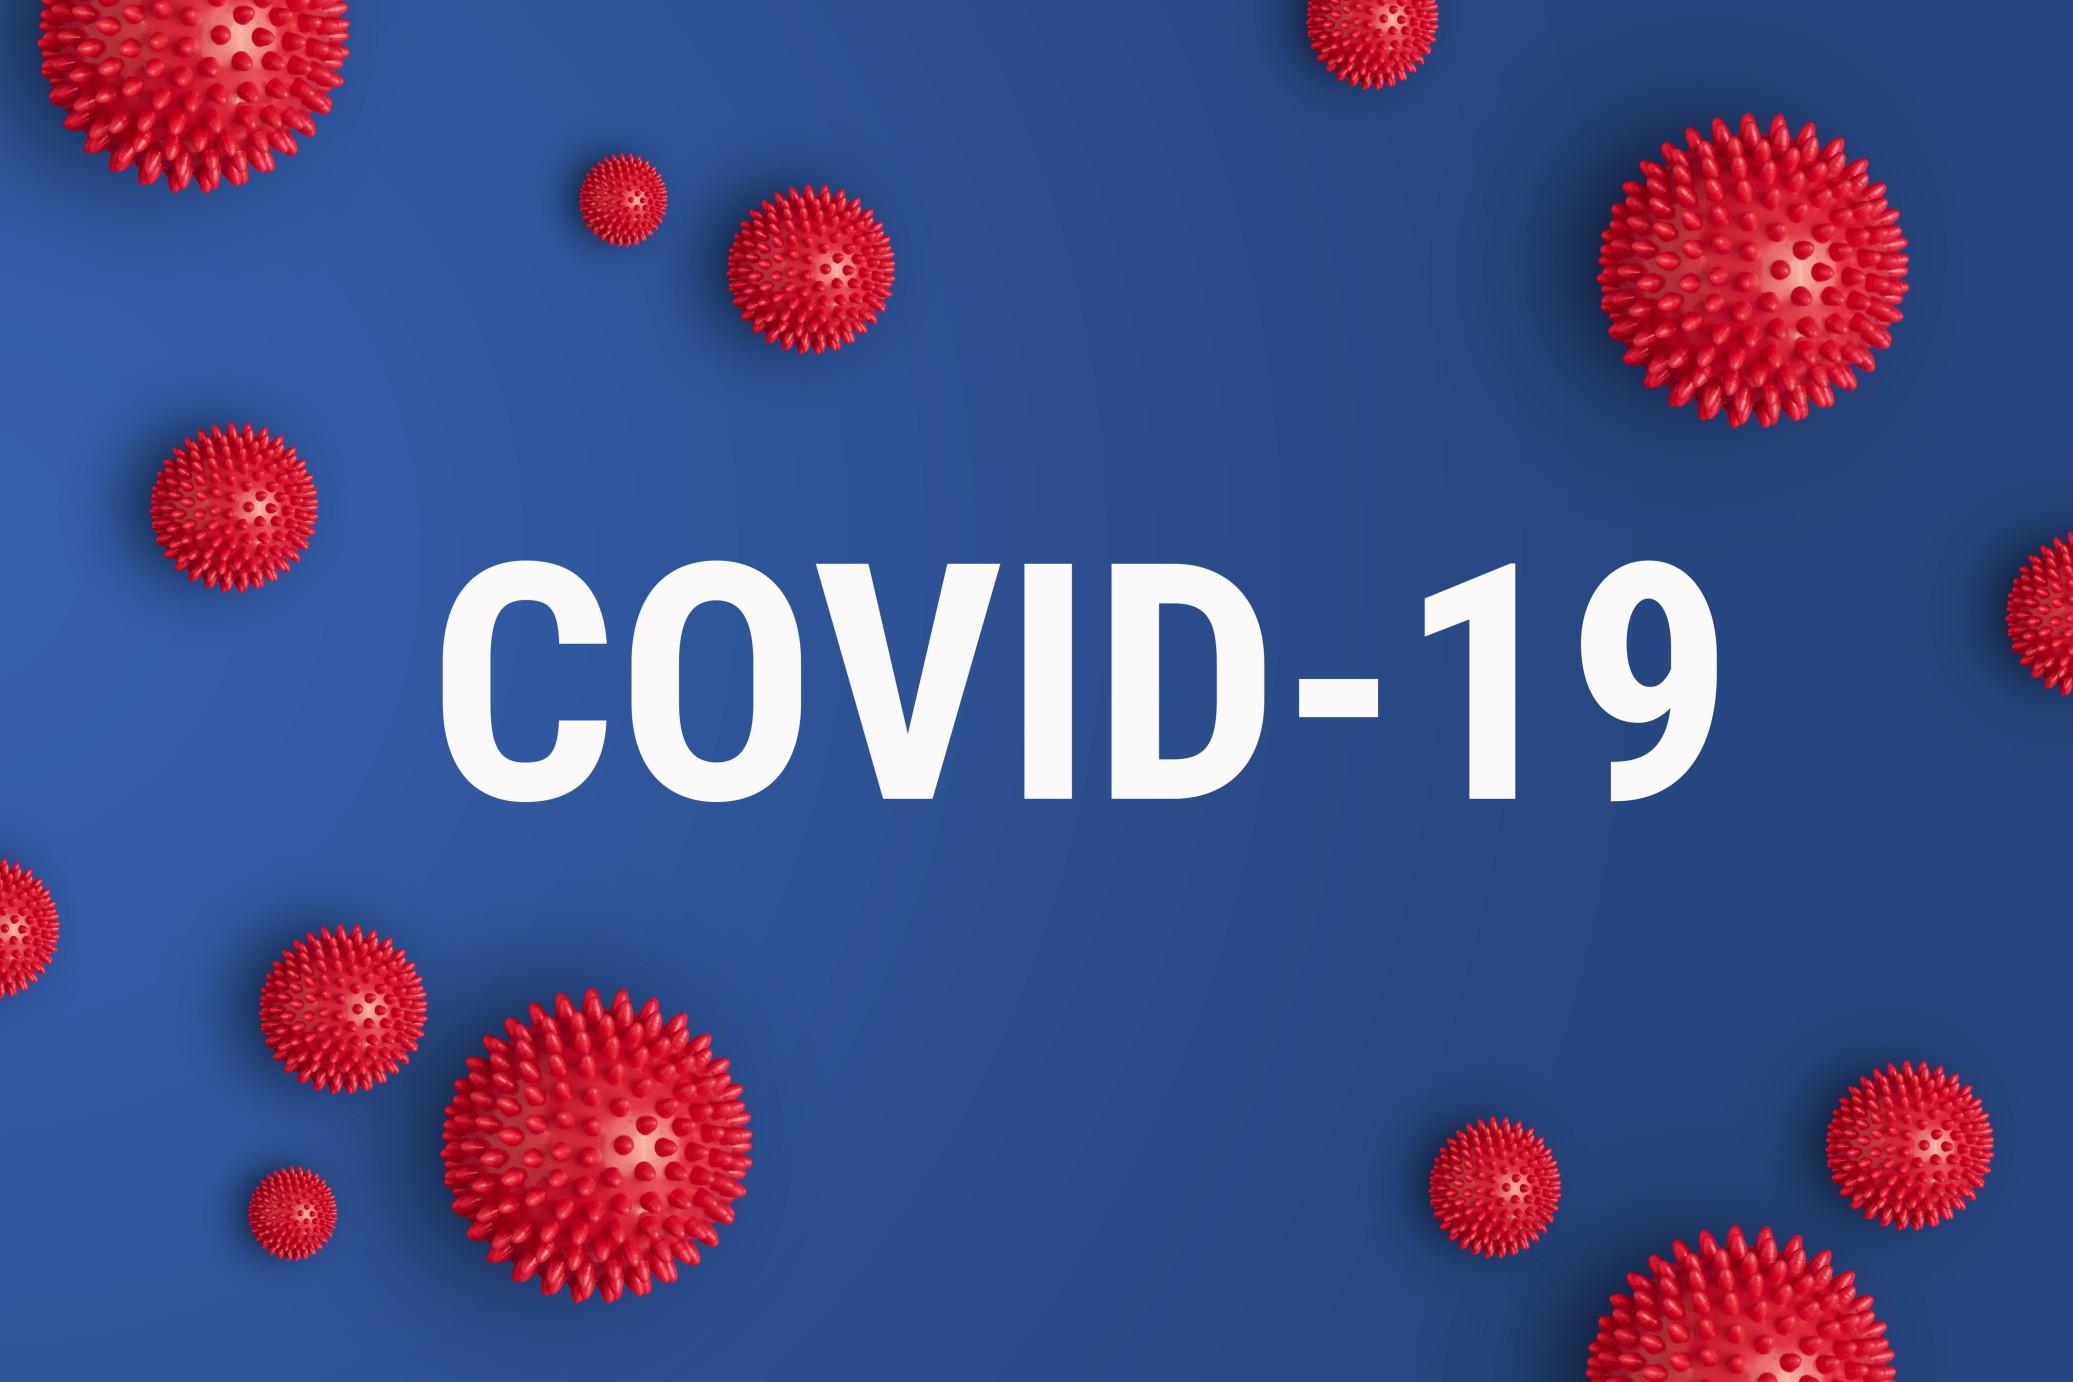 COVID-19 continues to have a huge impact on the auto industry.